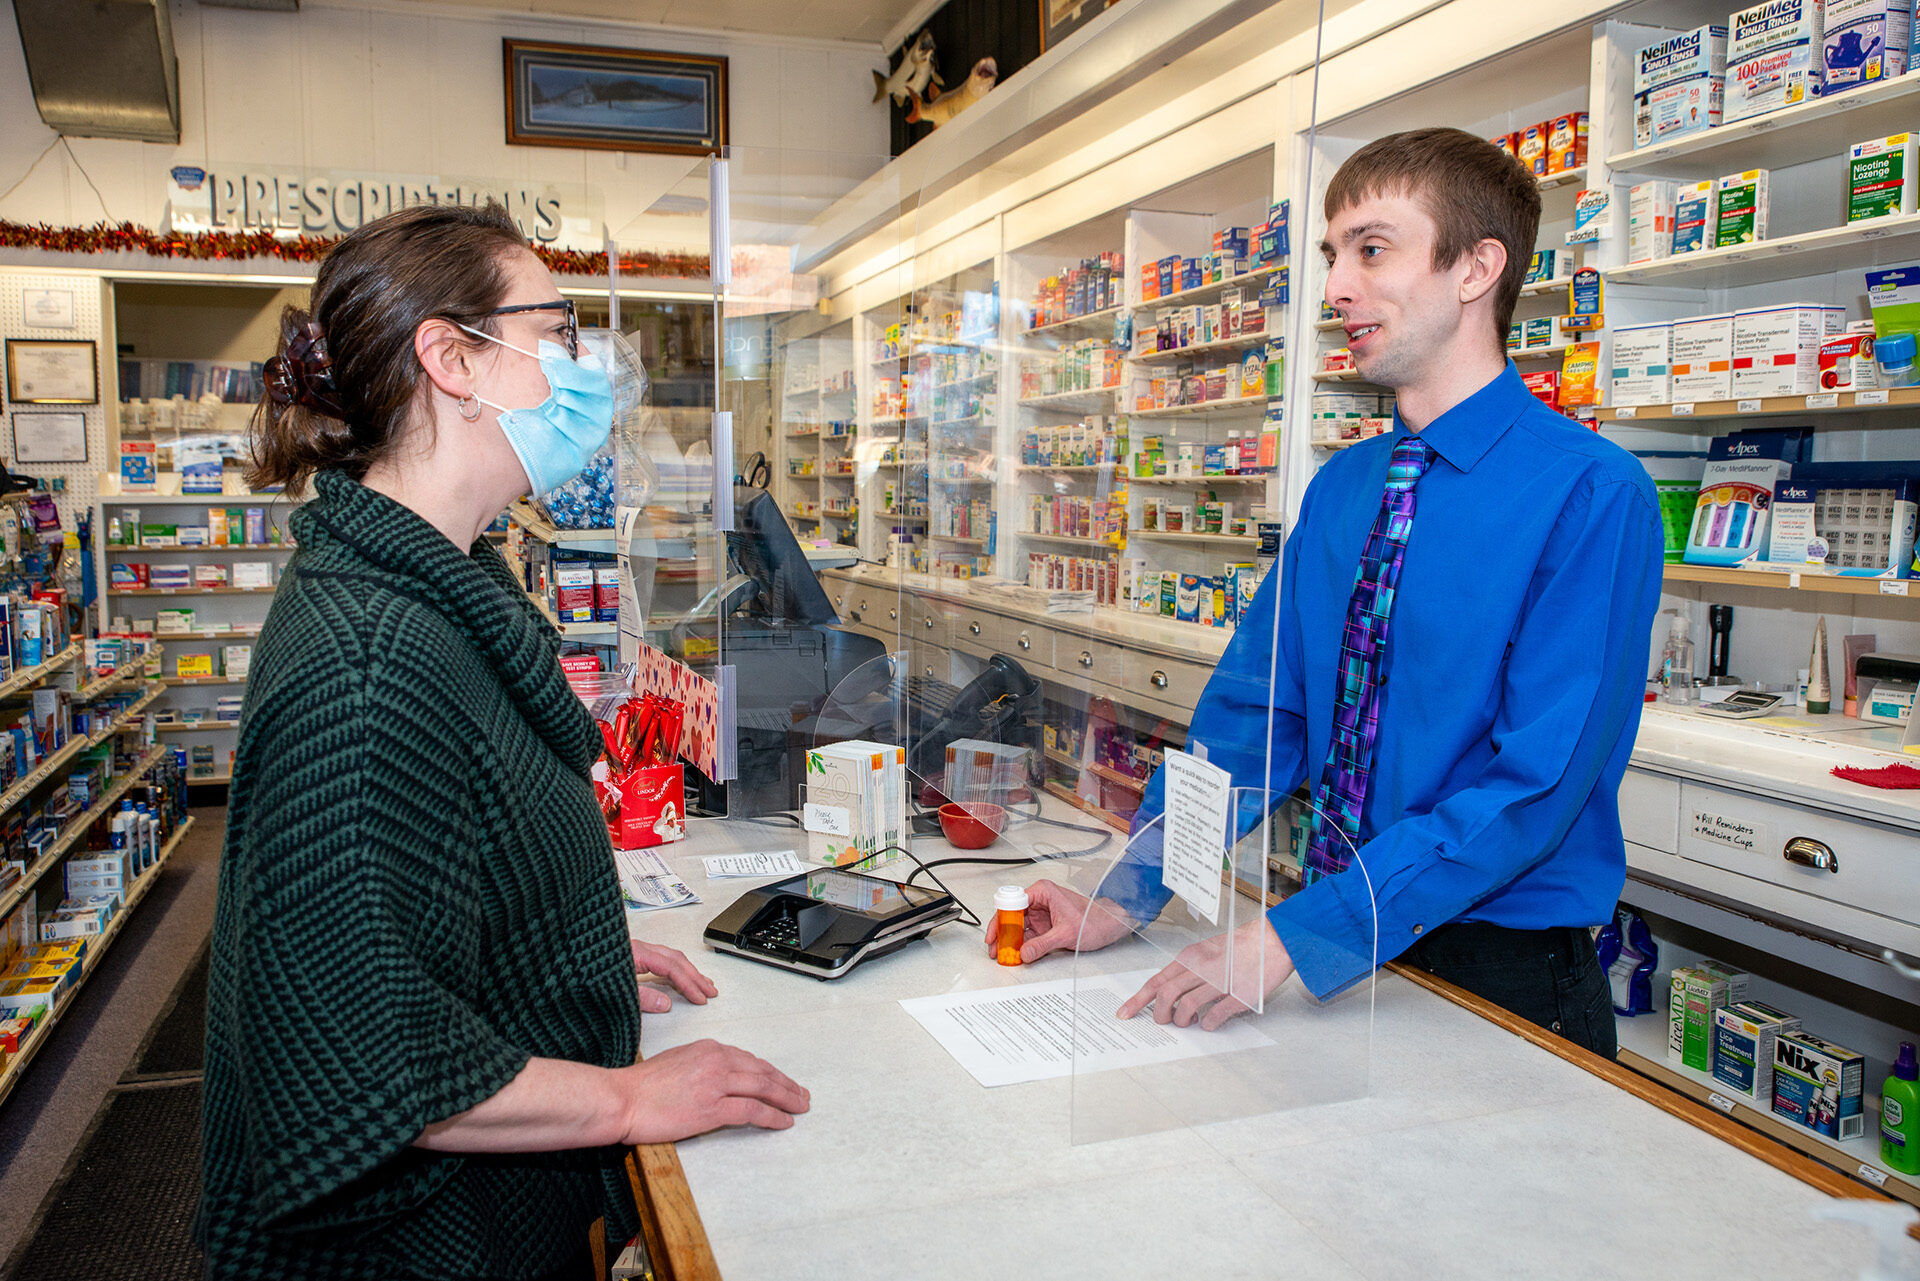 Community pharmacist Aaron Gehrke helps a patient with her medication question